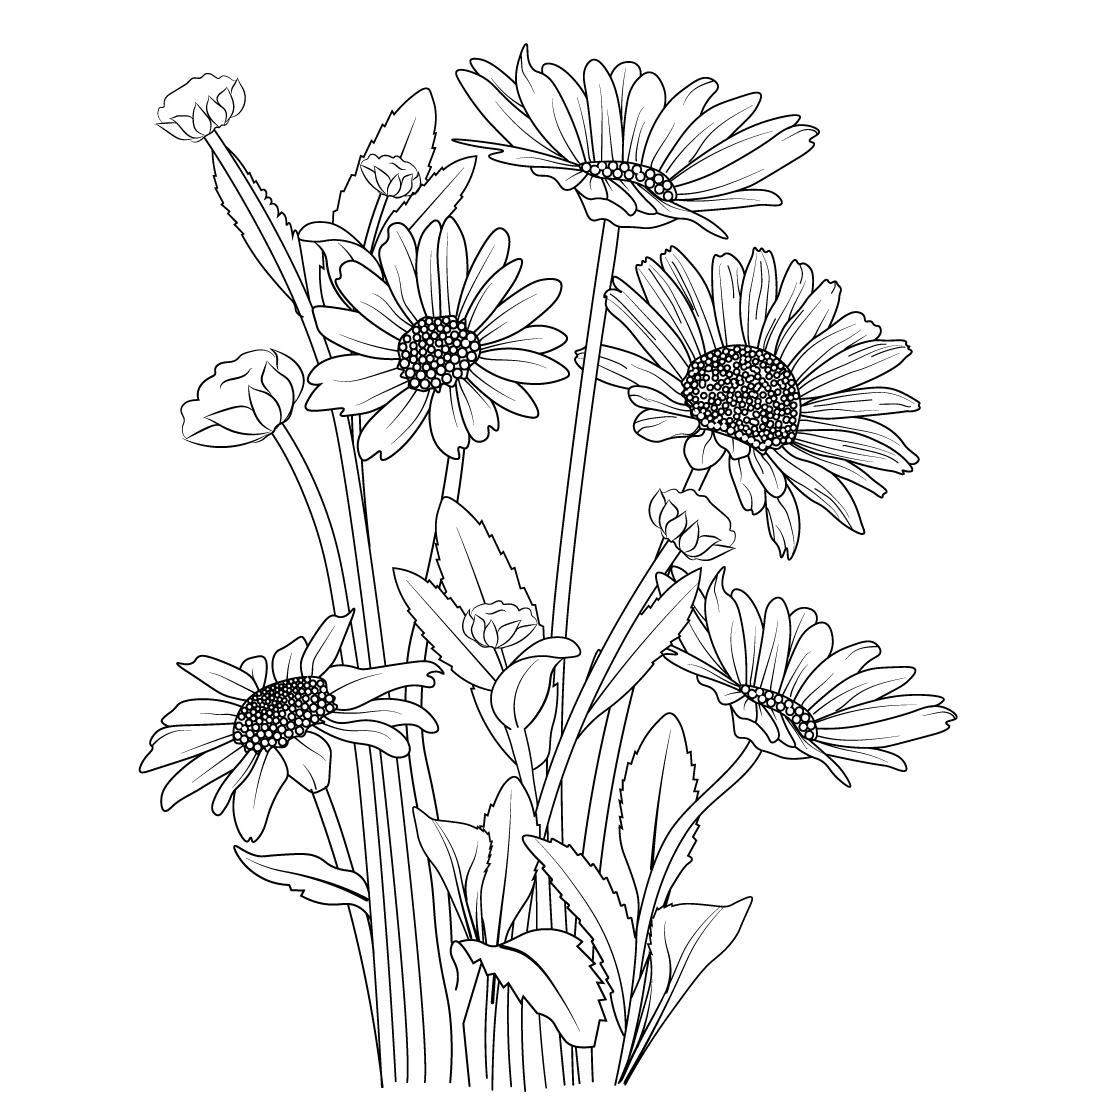 Draw Flowers - Black And White Flower - CleanPNG / KissPNG